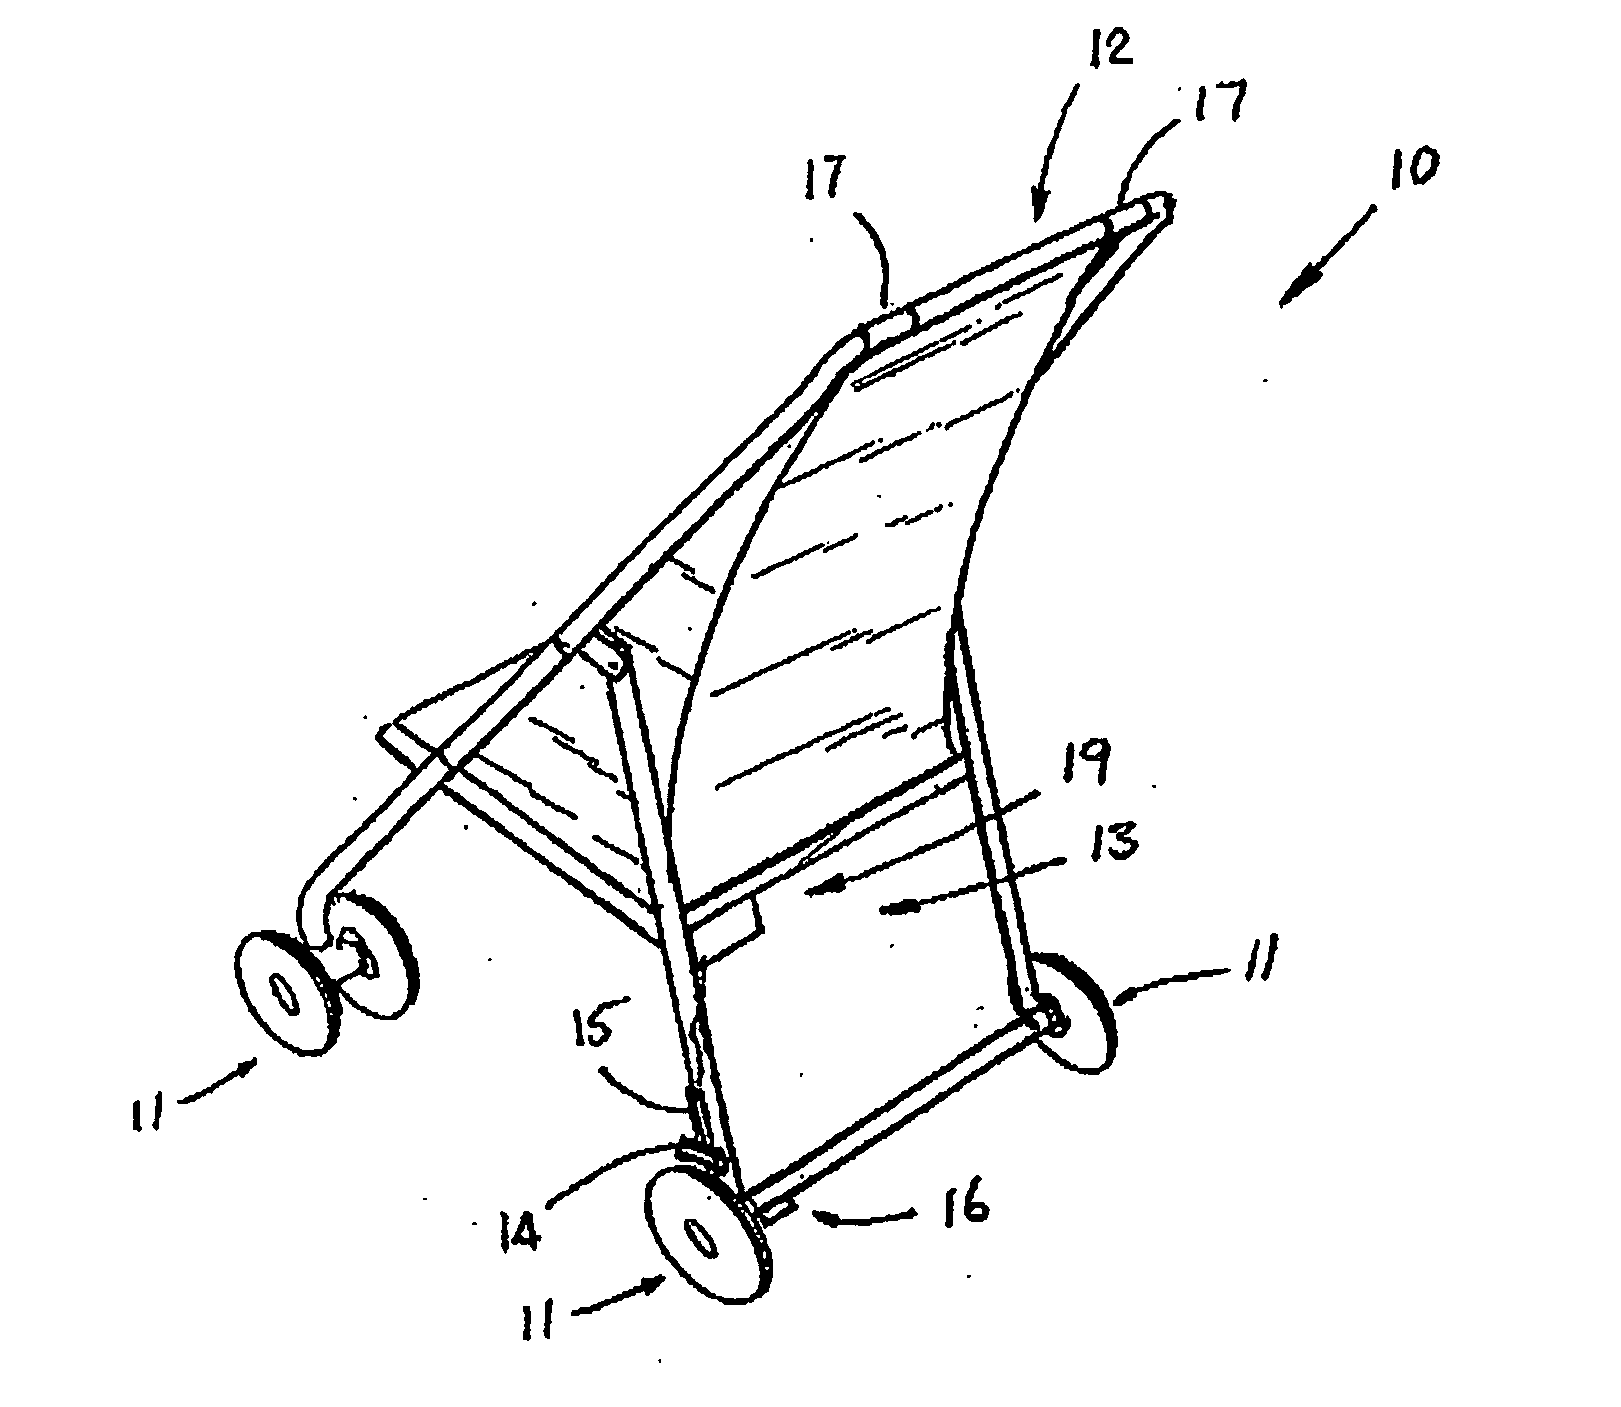 Automatic brake control for hand-propelled vehicles